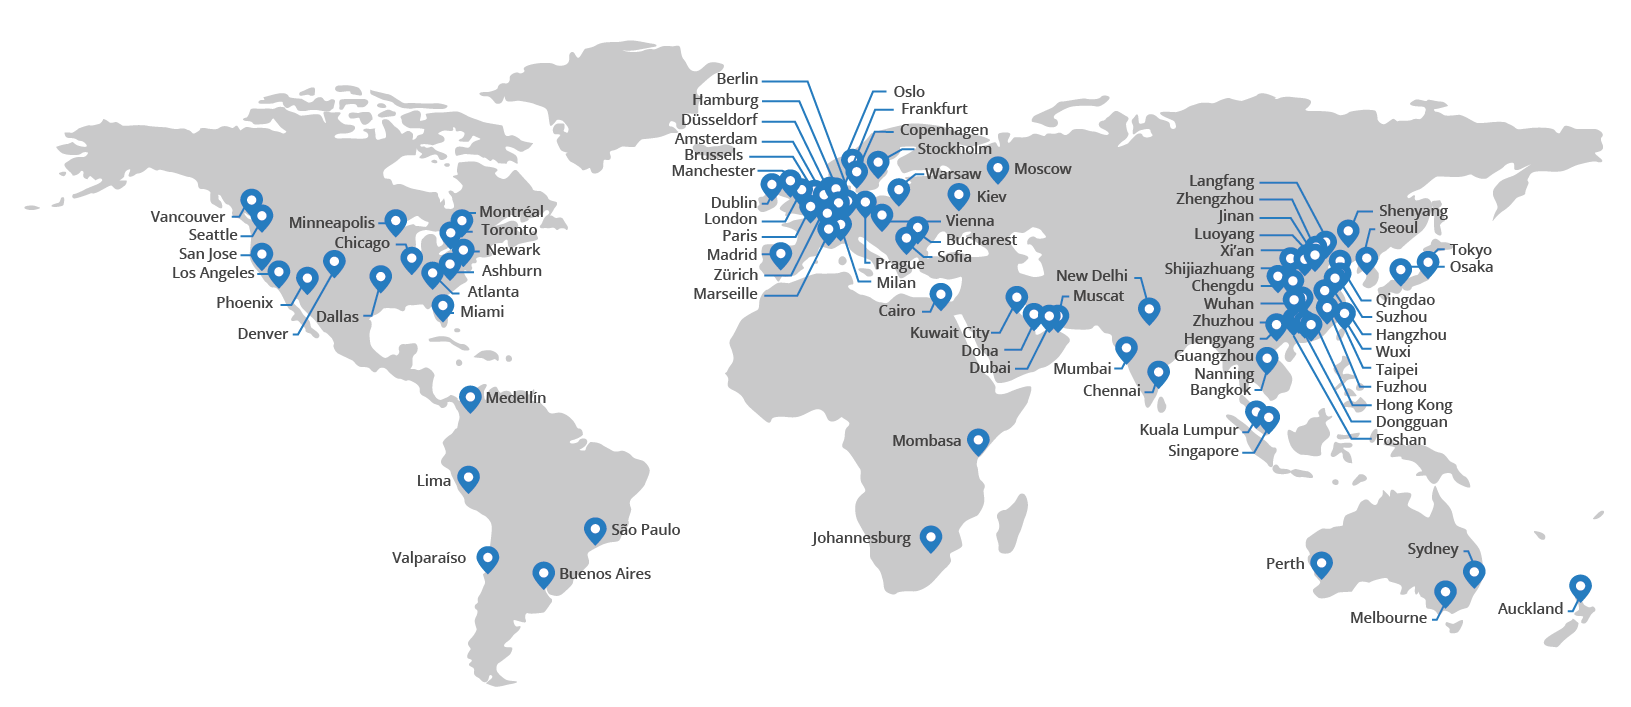 Network Map Cloudflare